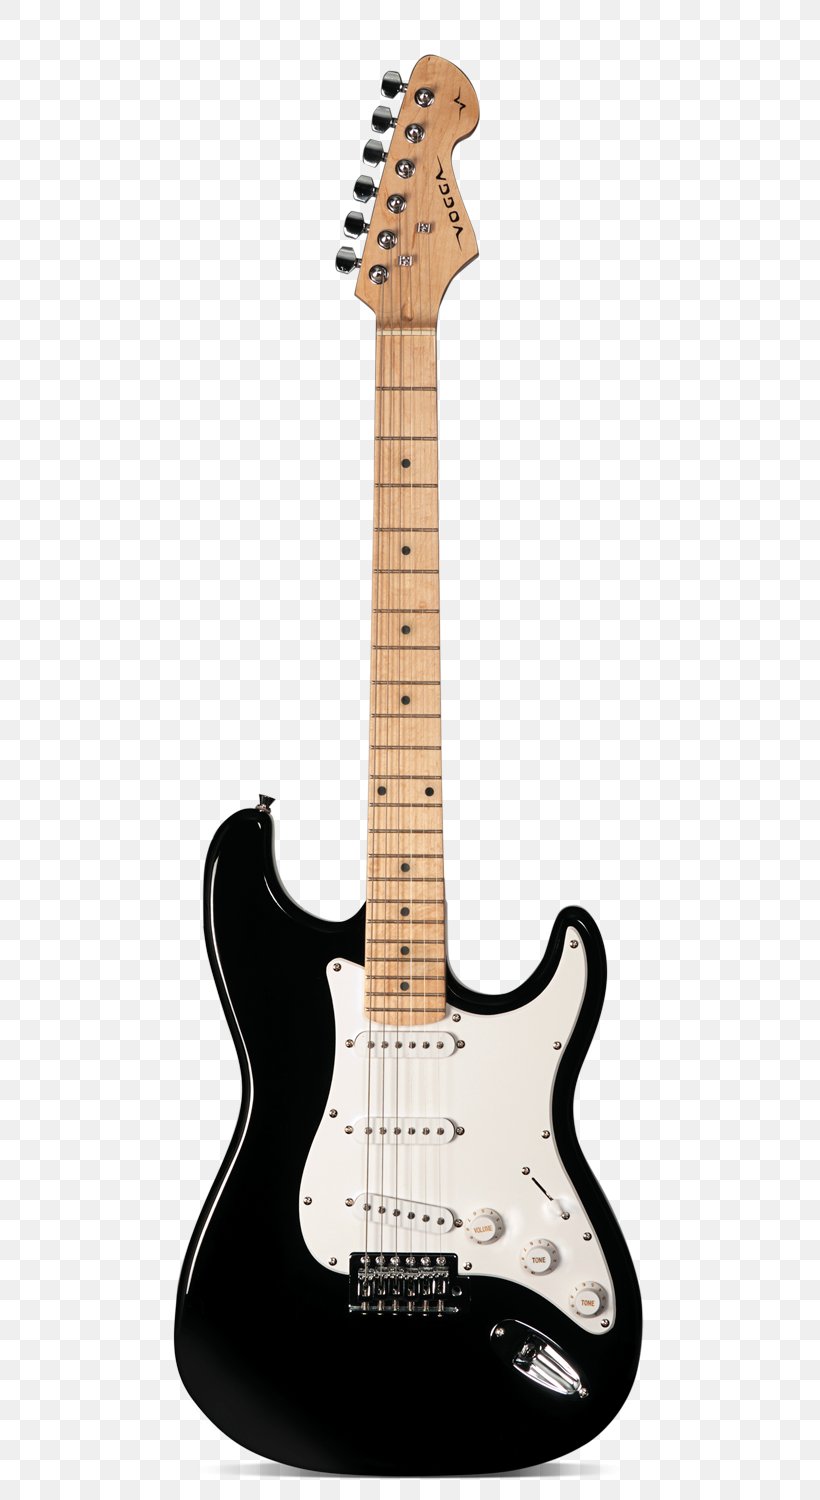 Fender Stratocaster Fender Squier Affinity Stratocaster Electric Guitar Fender Precision Bass Musical Instruments, PNG, 675x1500px, Fender Stratocaster, Acoustic Electric Guitar, Bass Guitar, Electric Guitar, Electronic Musical Instrument Download Free